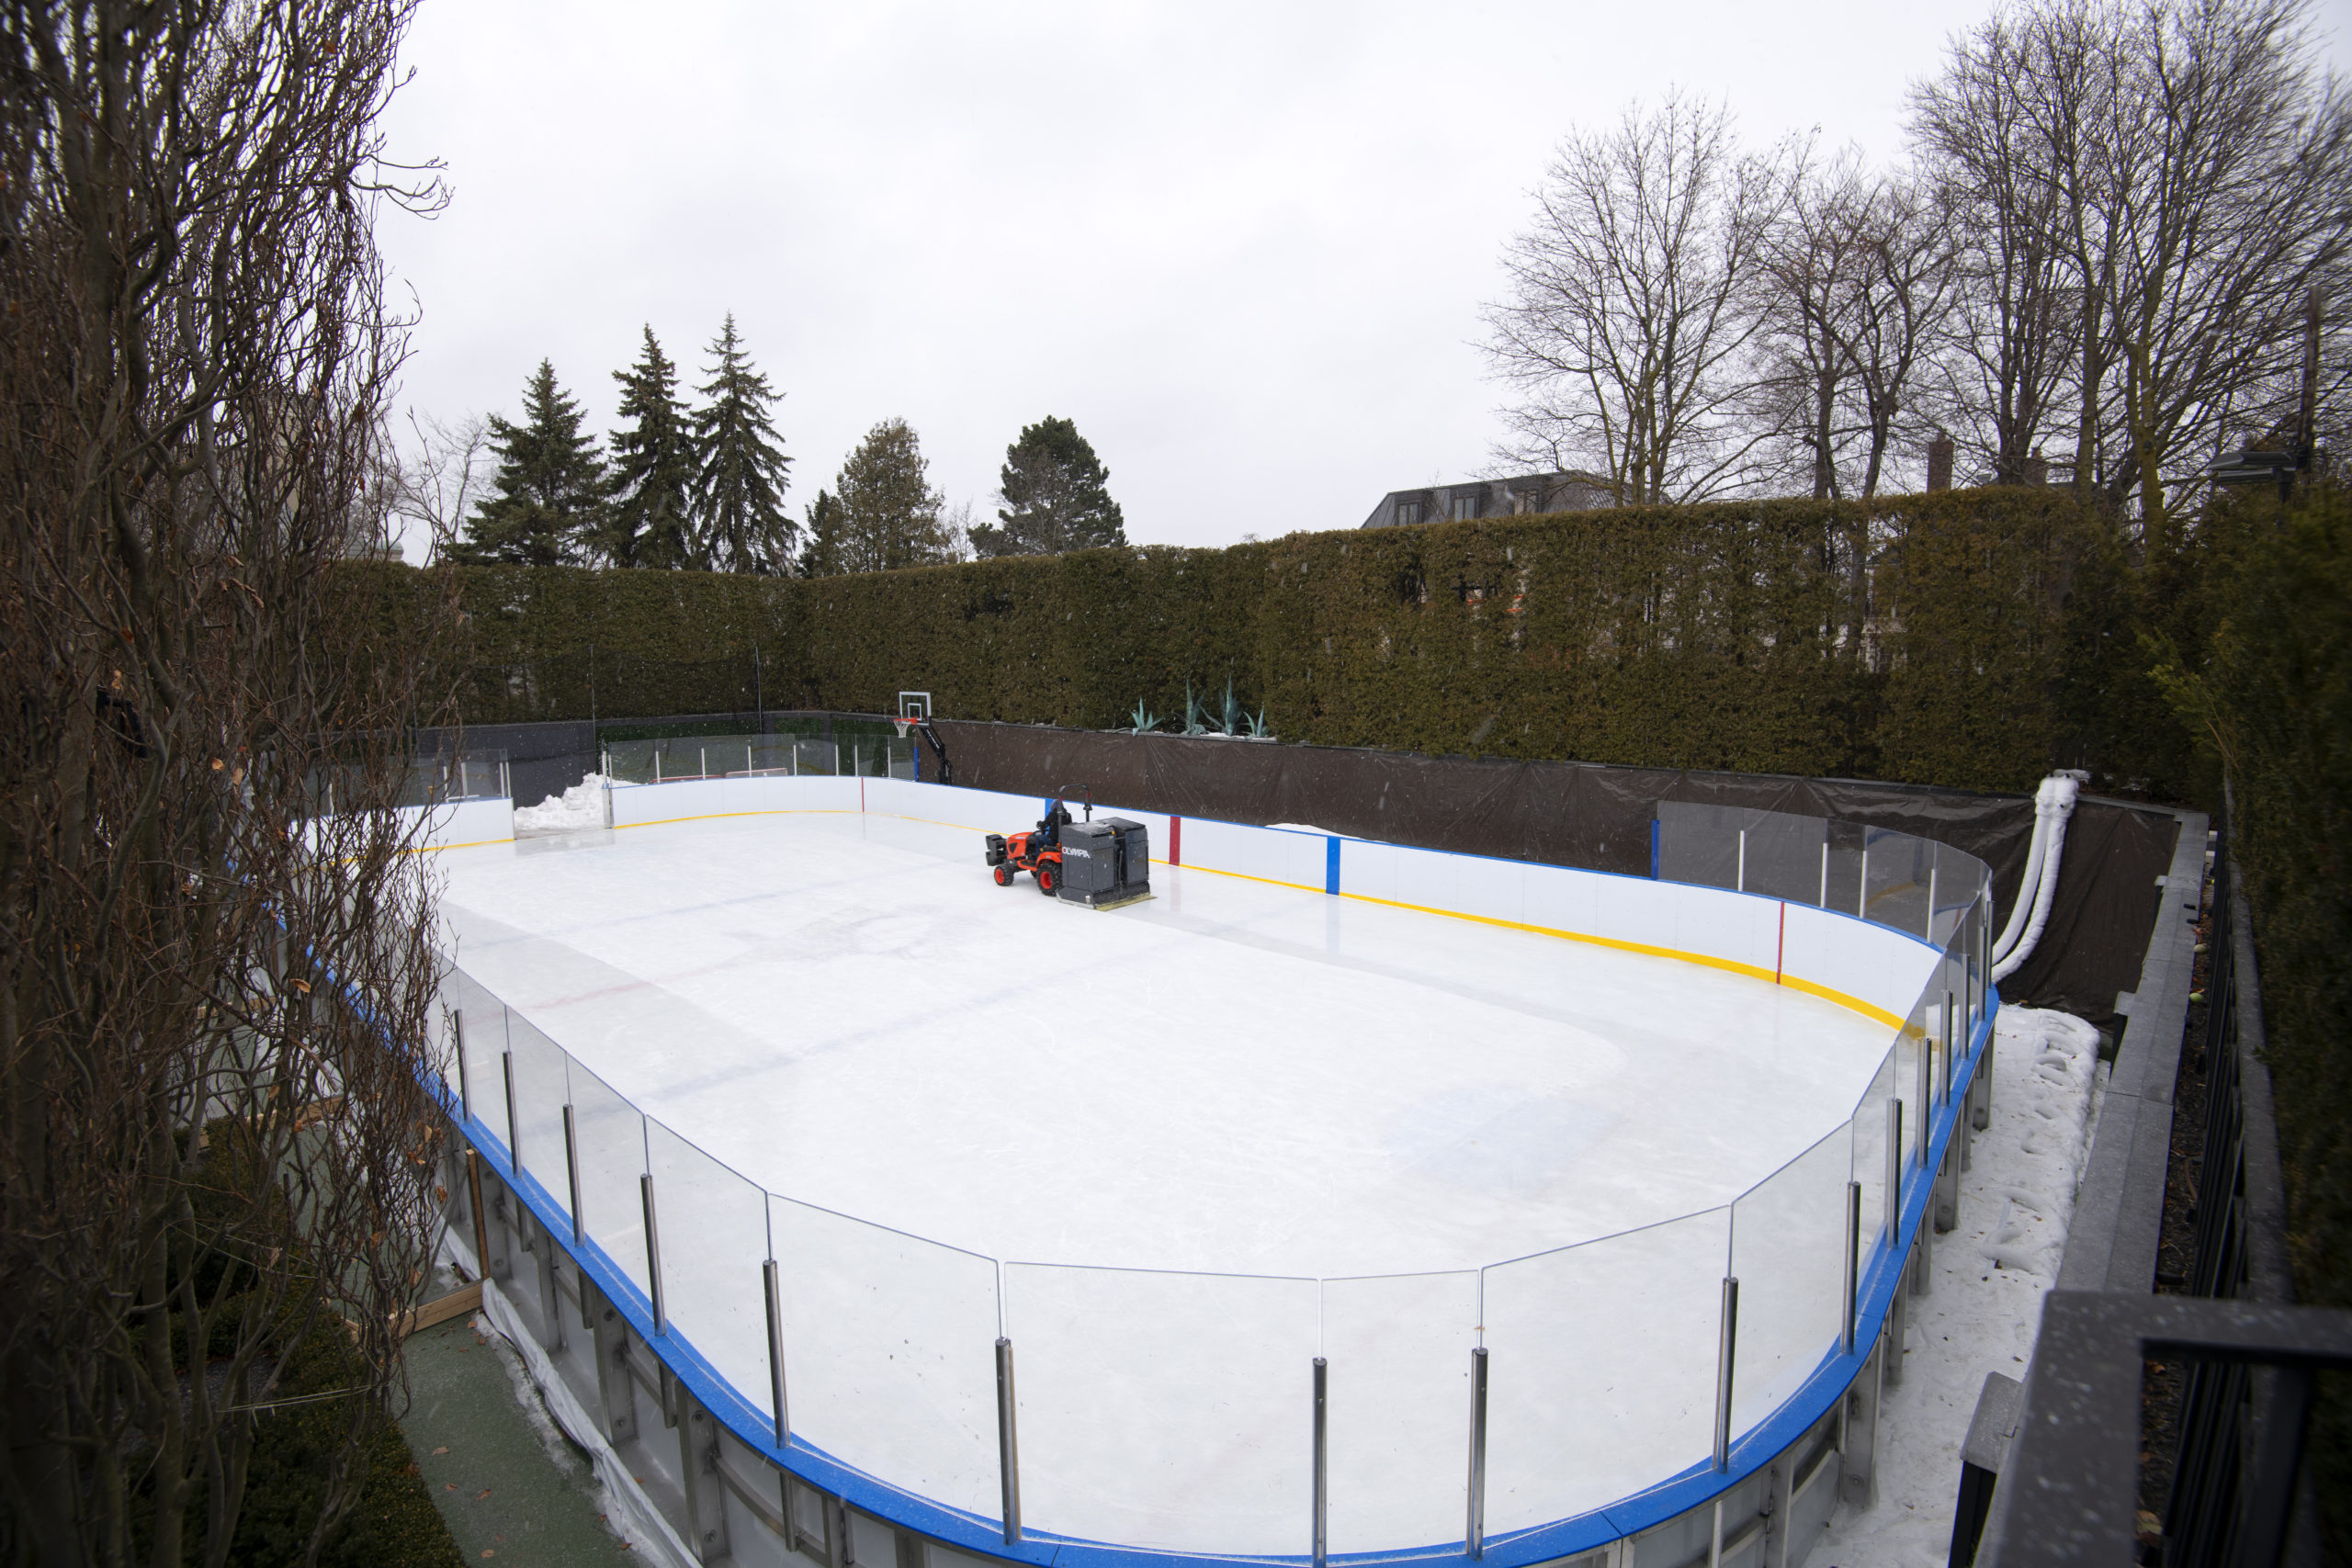 Portable refrigerated rink on a tennis court